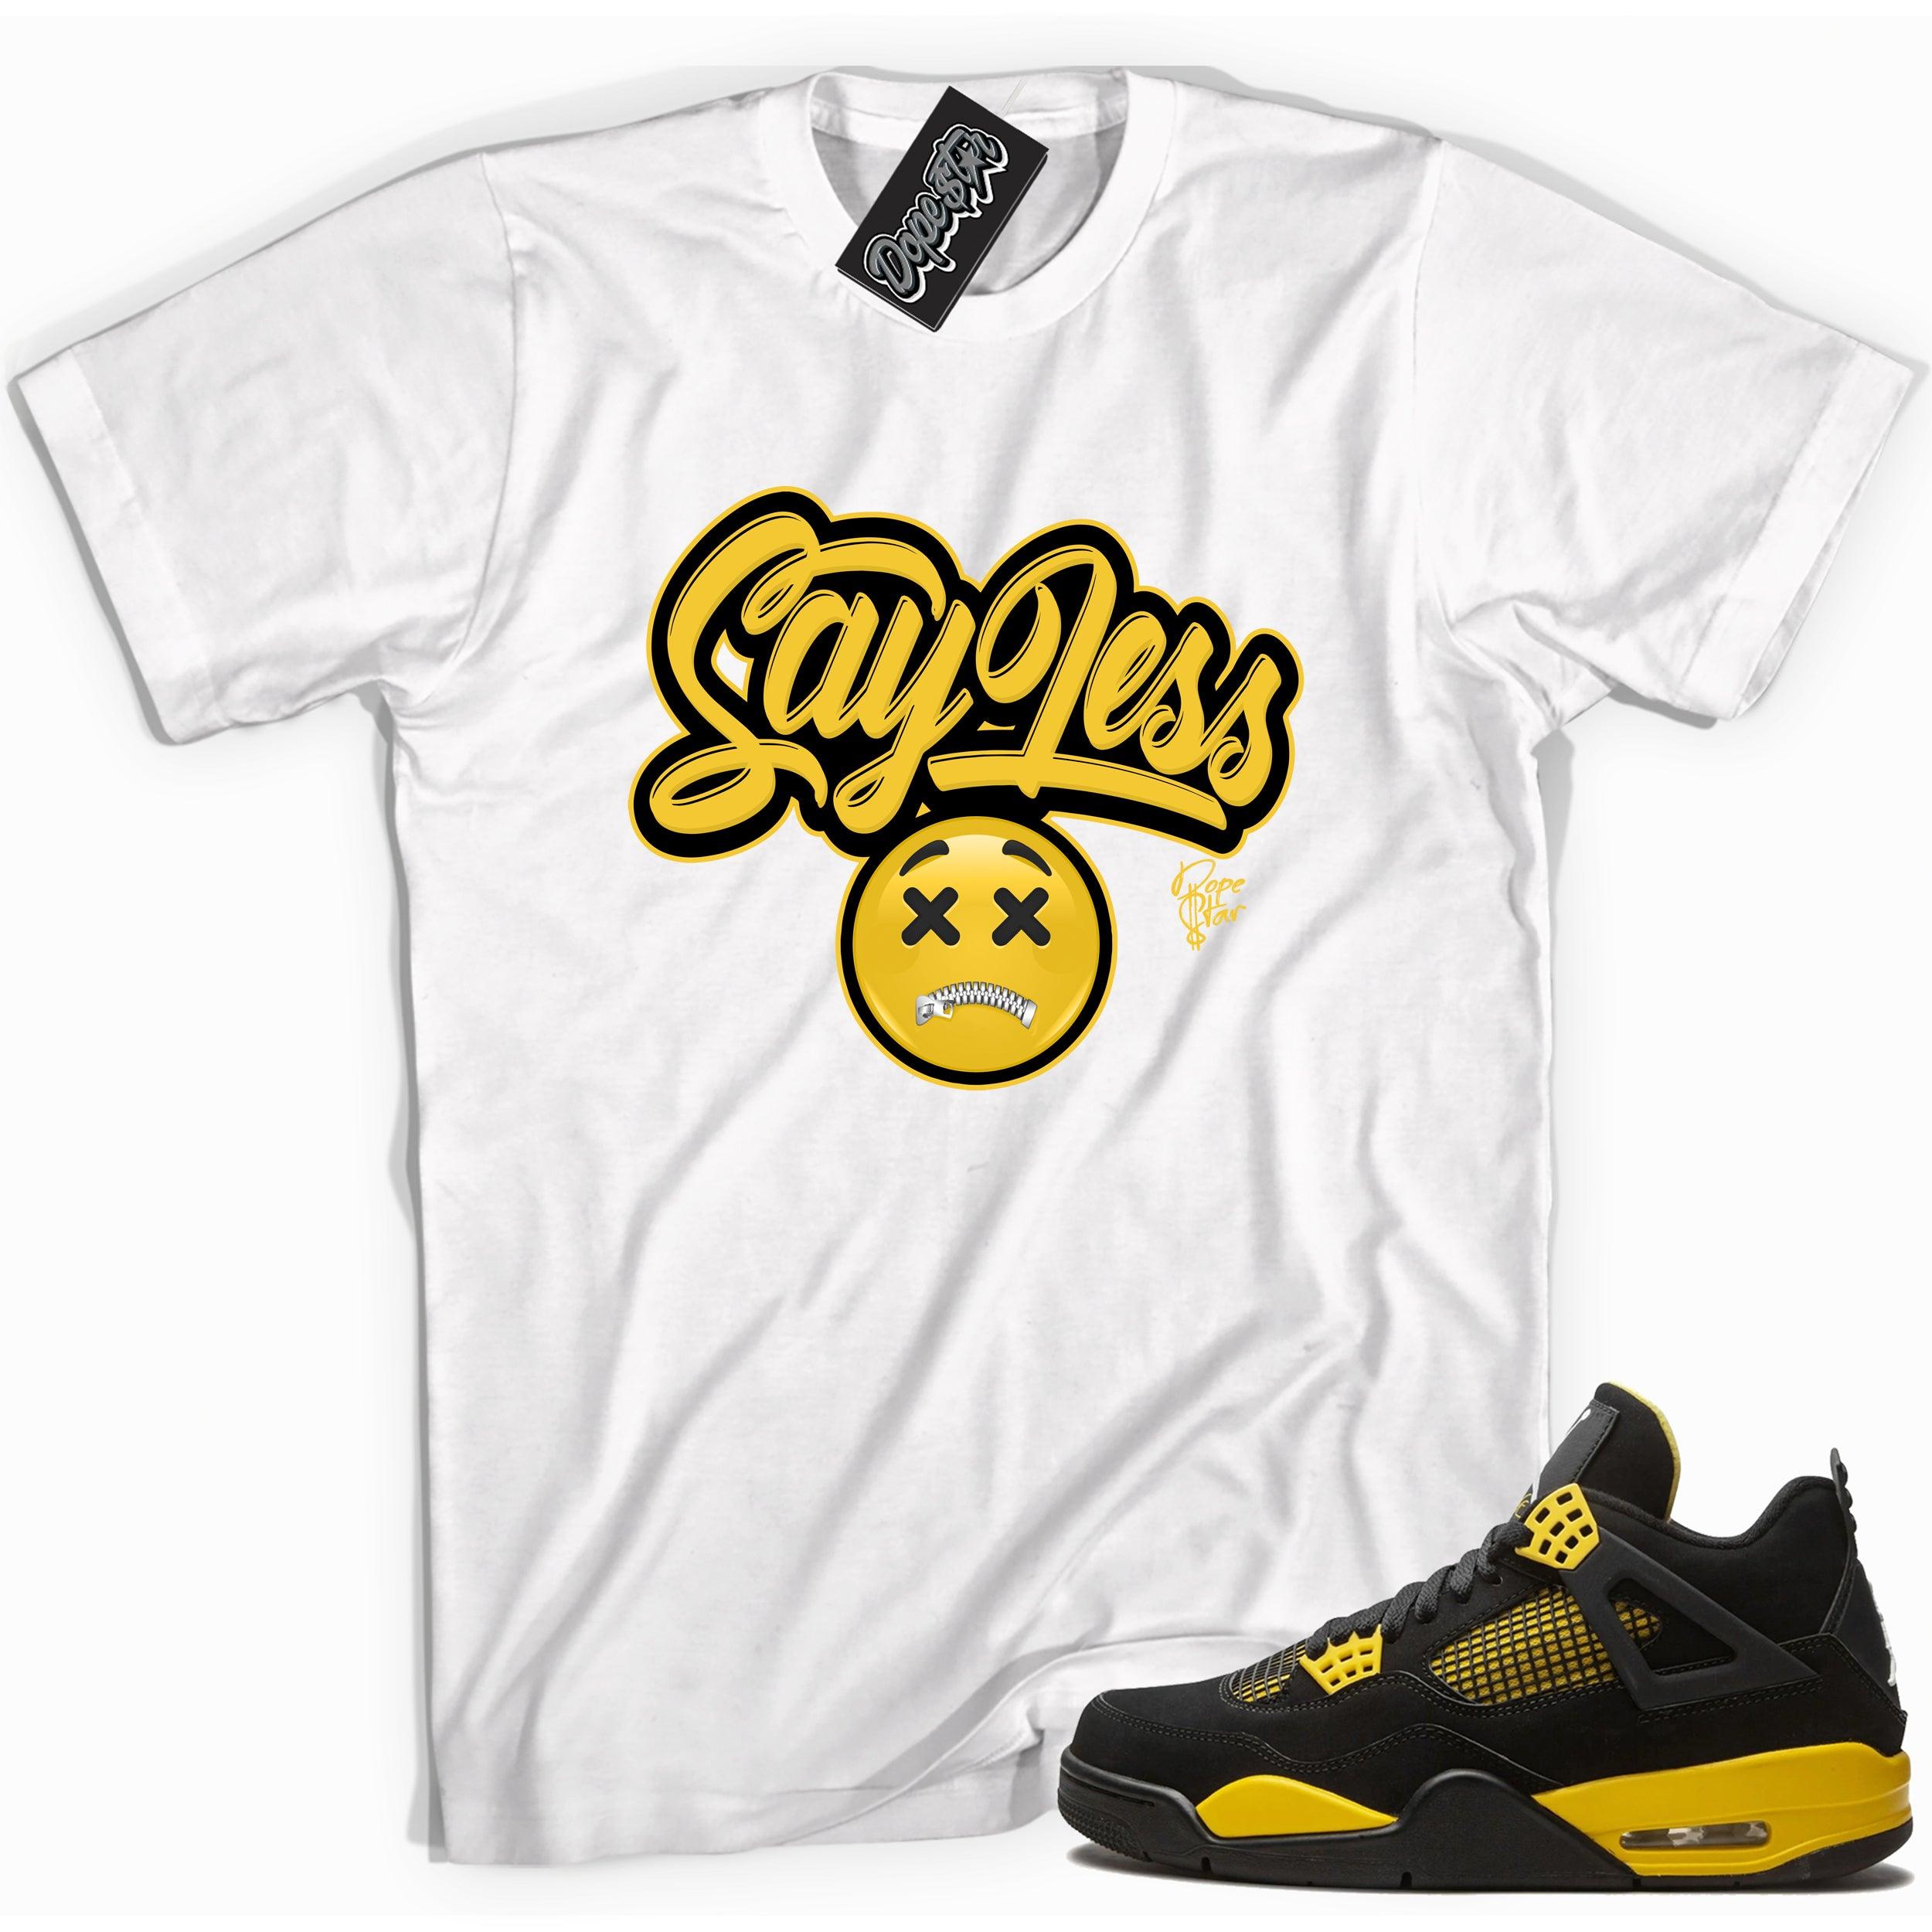 Cool white graphic tee with 'say less' print, that perfectly matches Air Jordan 4 Thunder sneakers